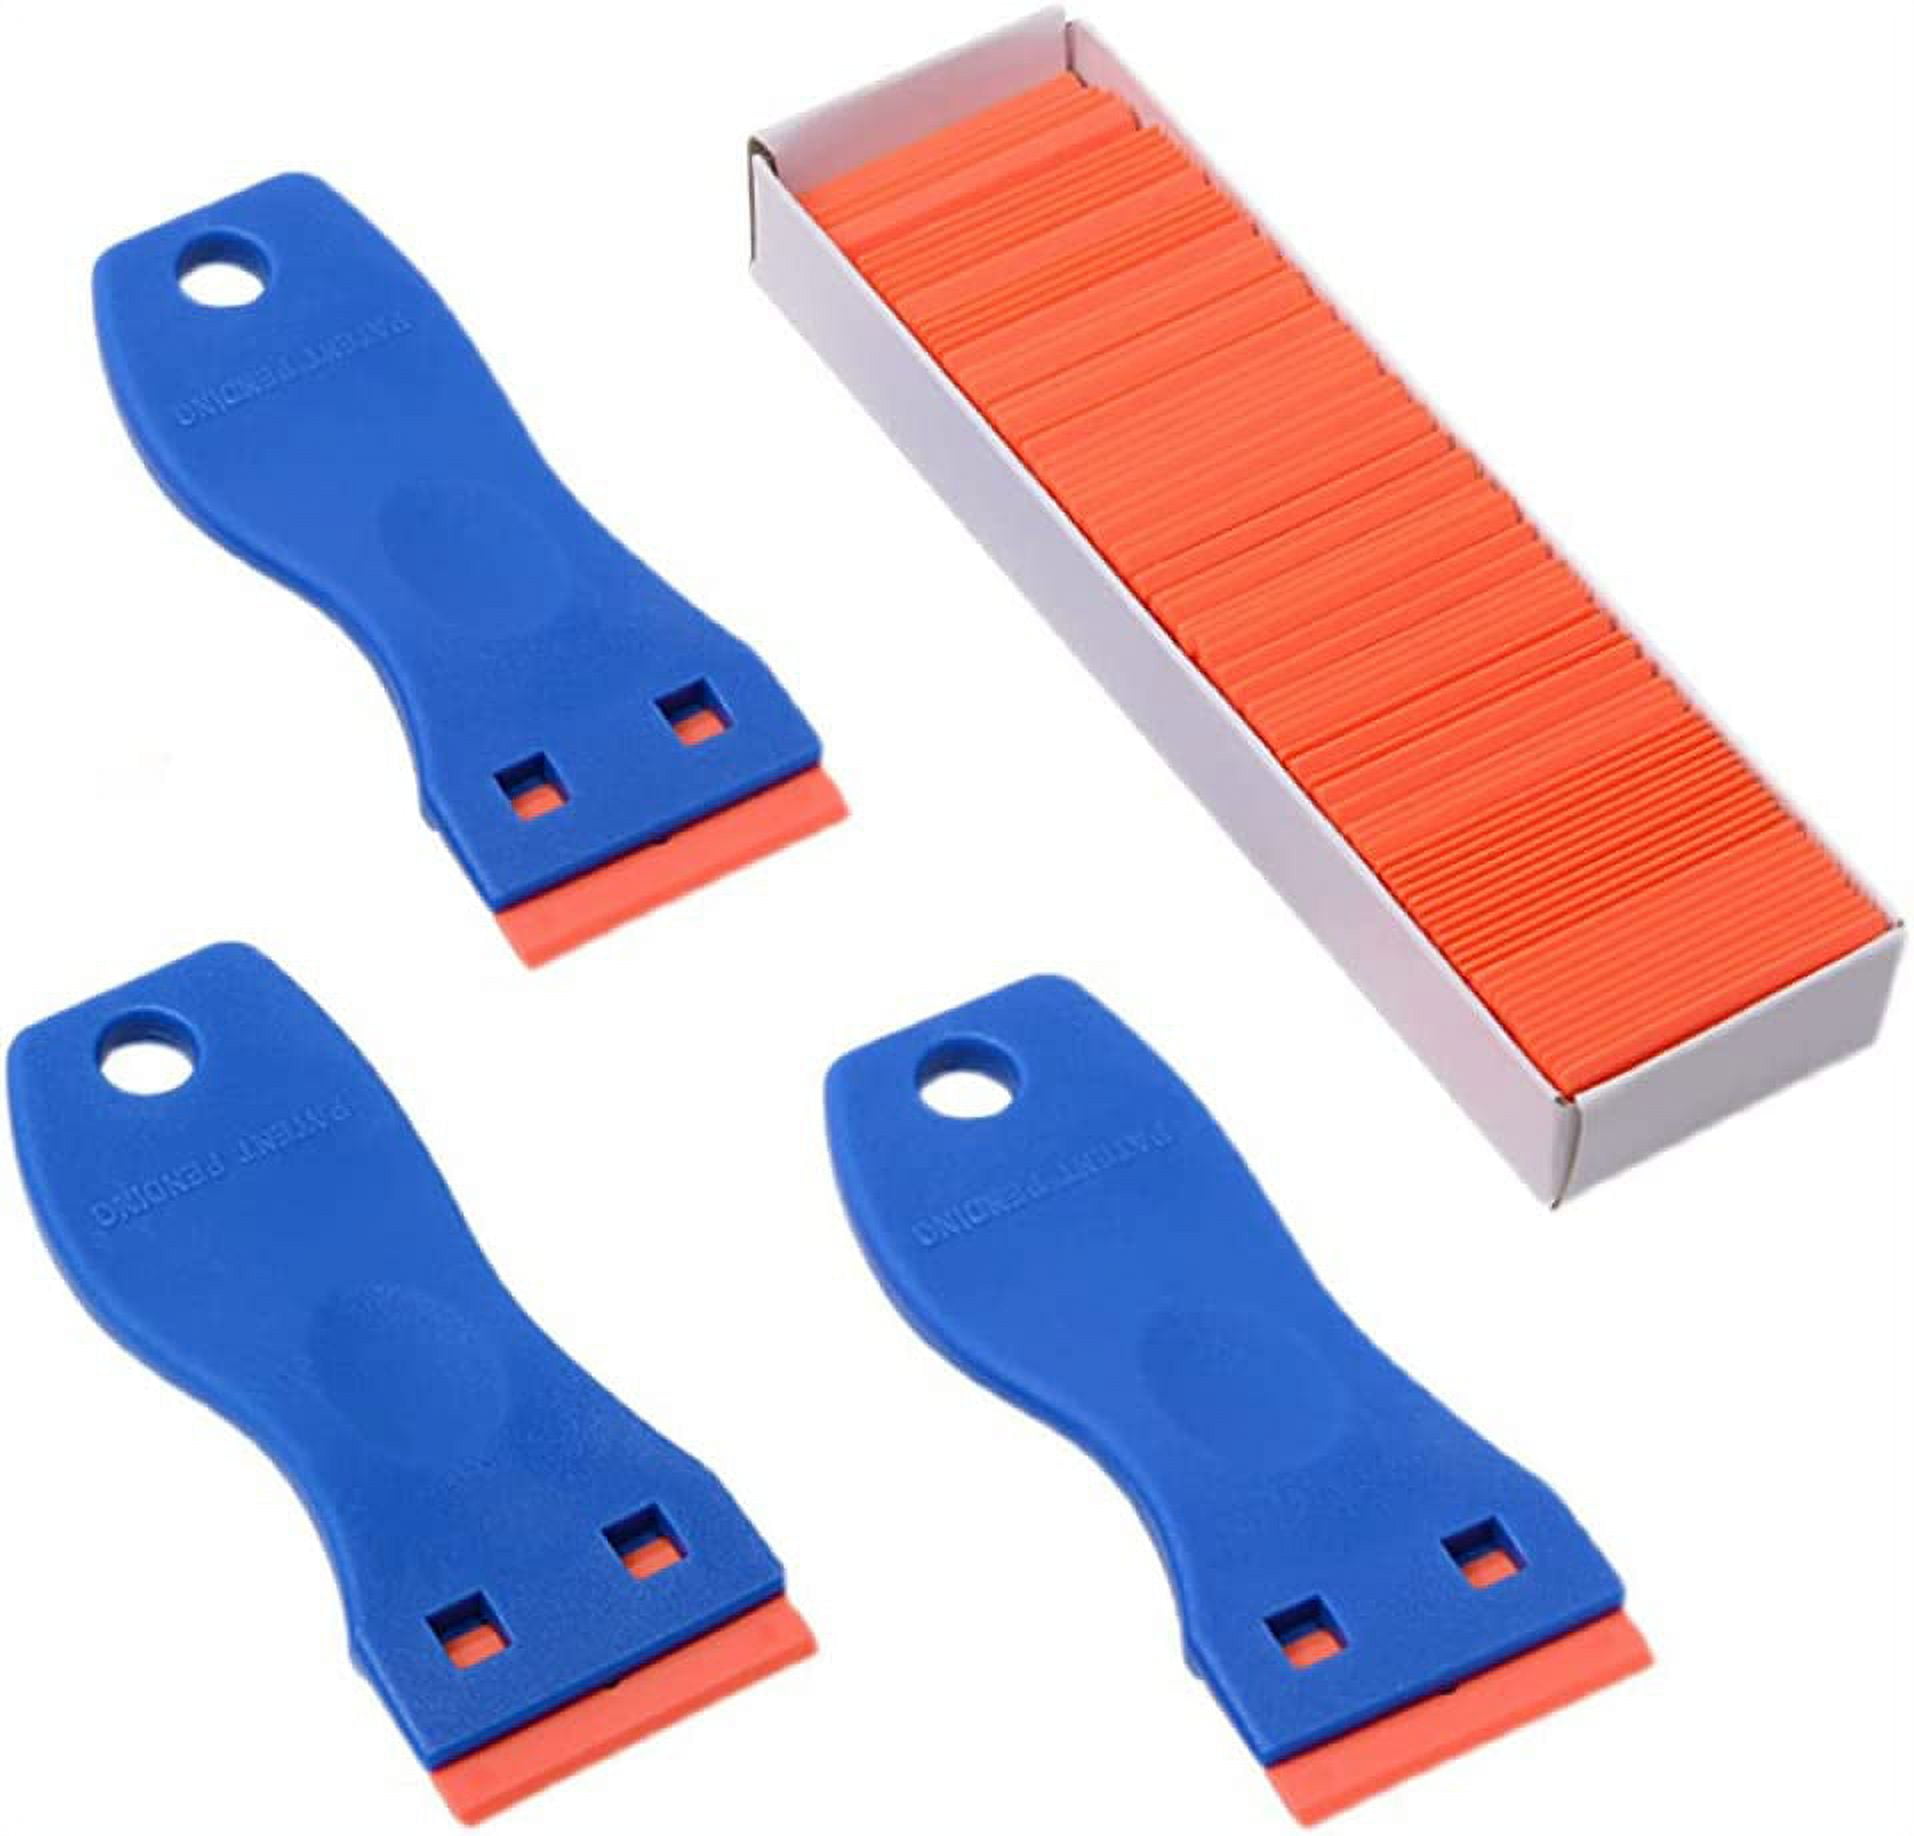 Plastic Razor Blade Scraper Tool, 2 Pcs Razor Scraper with 20 Pcs Plastic  Blades, Cleaning Scraper Remover for Removal Floor Stove Scraping Labels  and Decals Sticker on Car Window Glass 